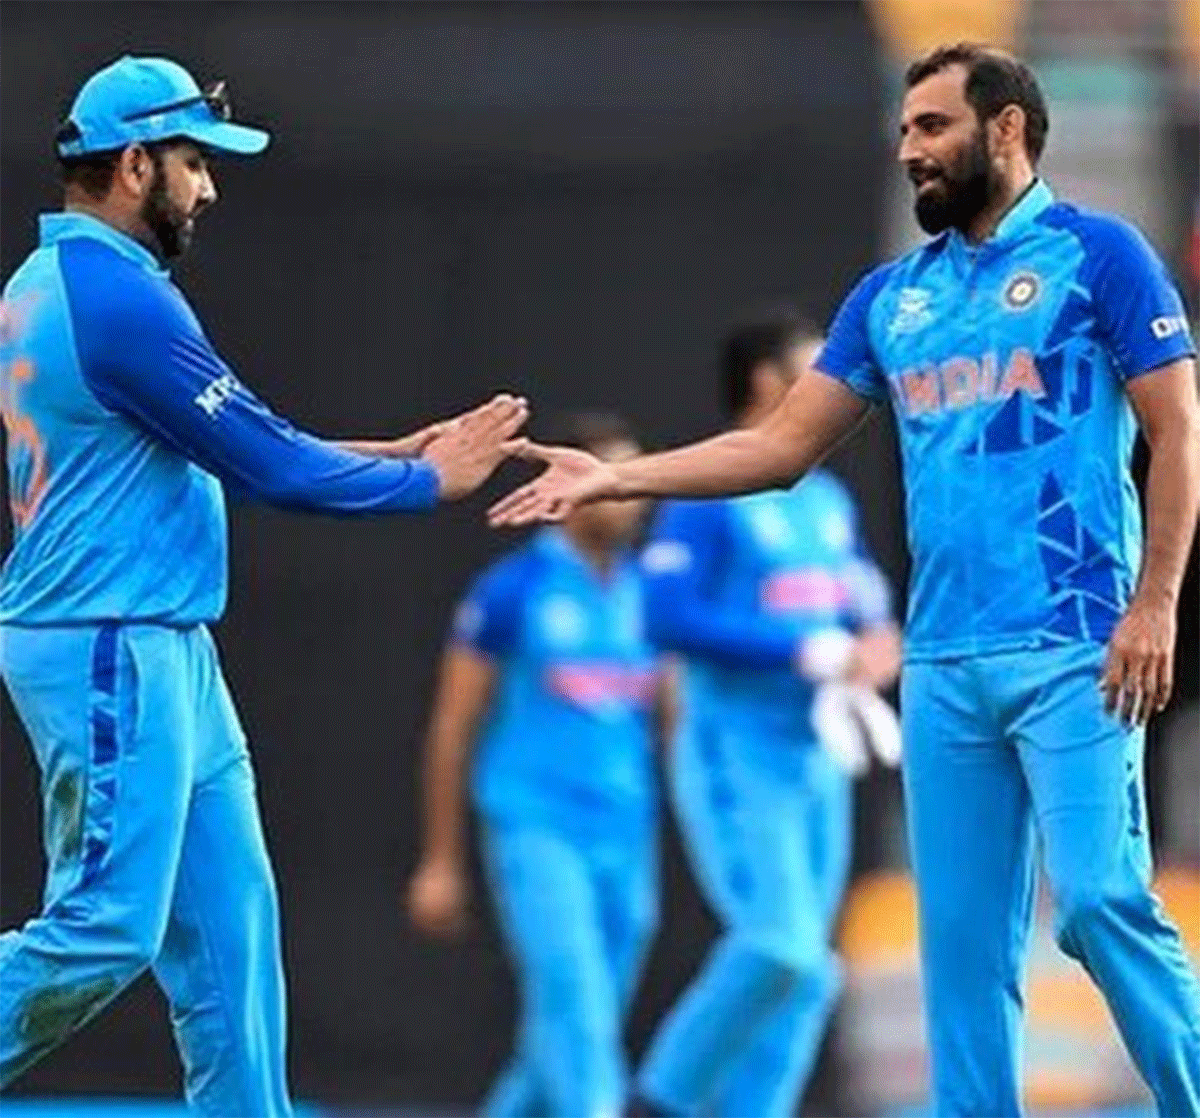 Mohammed Shami defended 11 runs in the final over to hand India a 6-run victory over Australia in a warm-up match.